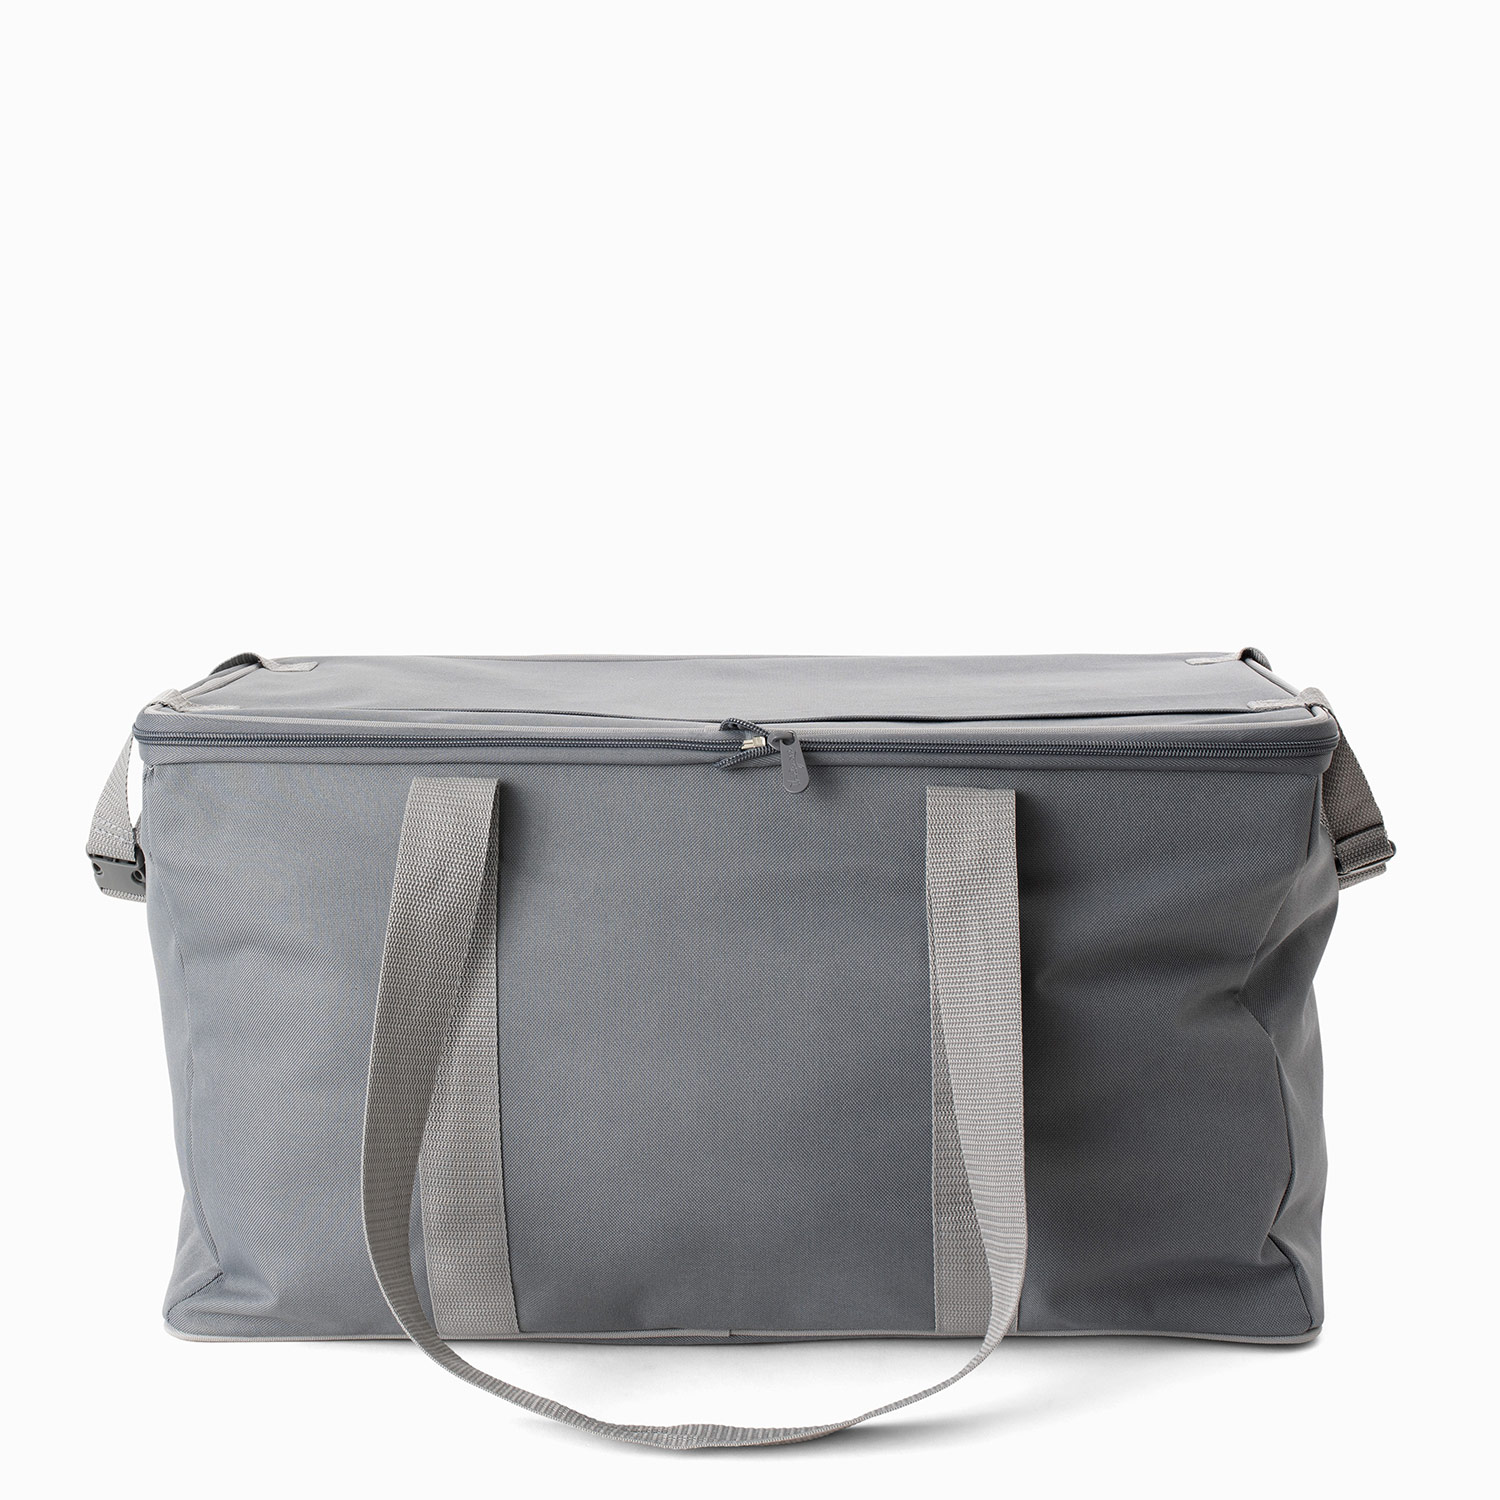 Grey Colorblock - Large Utility Hanging Luggage - Thirty-One Gifts -  Affordable Purses, Totes & Bags